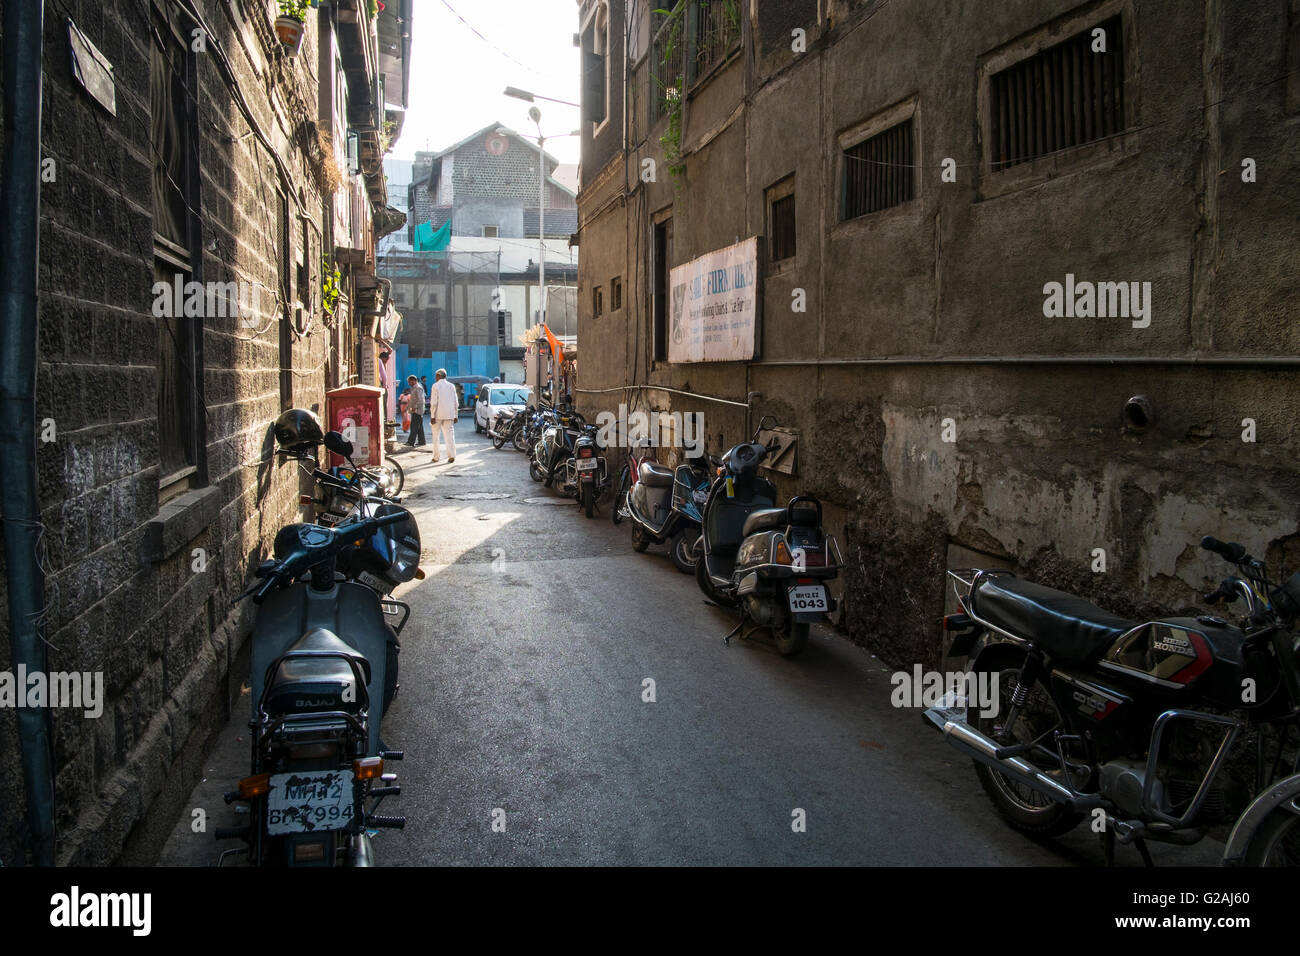 An alley between two old buildings in Old Pune, Maharashtra Stock Photo